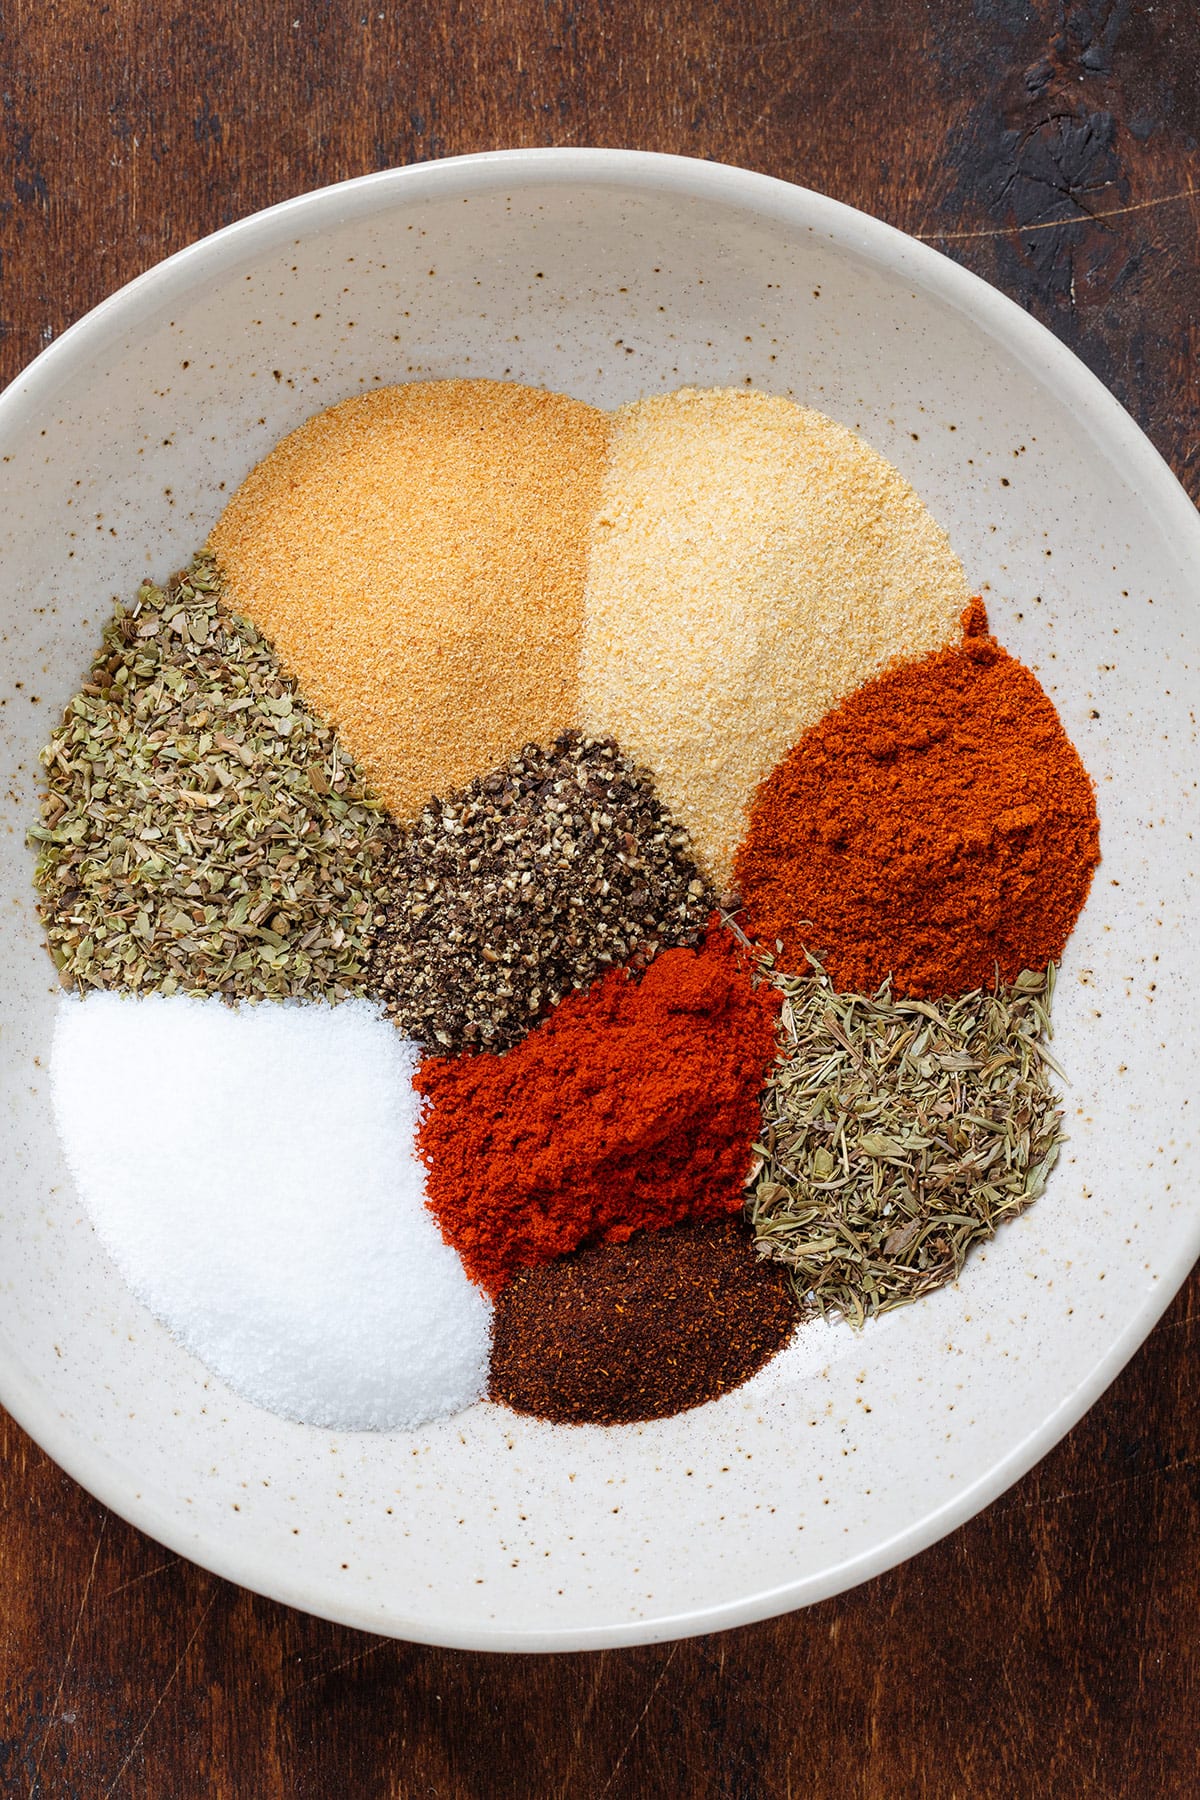 Various spices neatly measured out in a beige bowl on a wooden background.